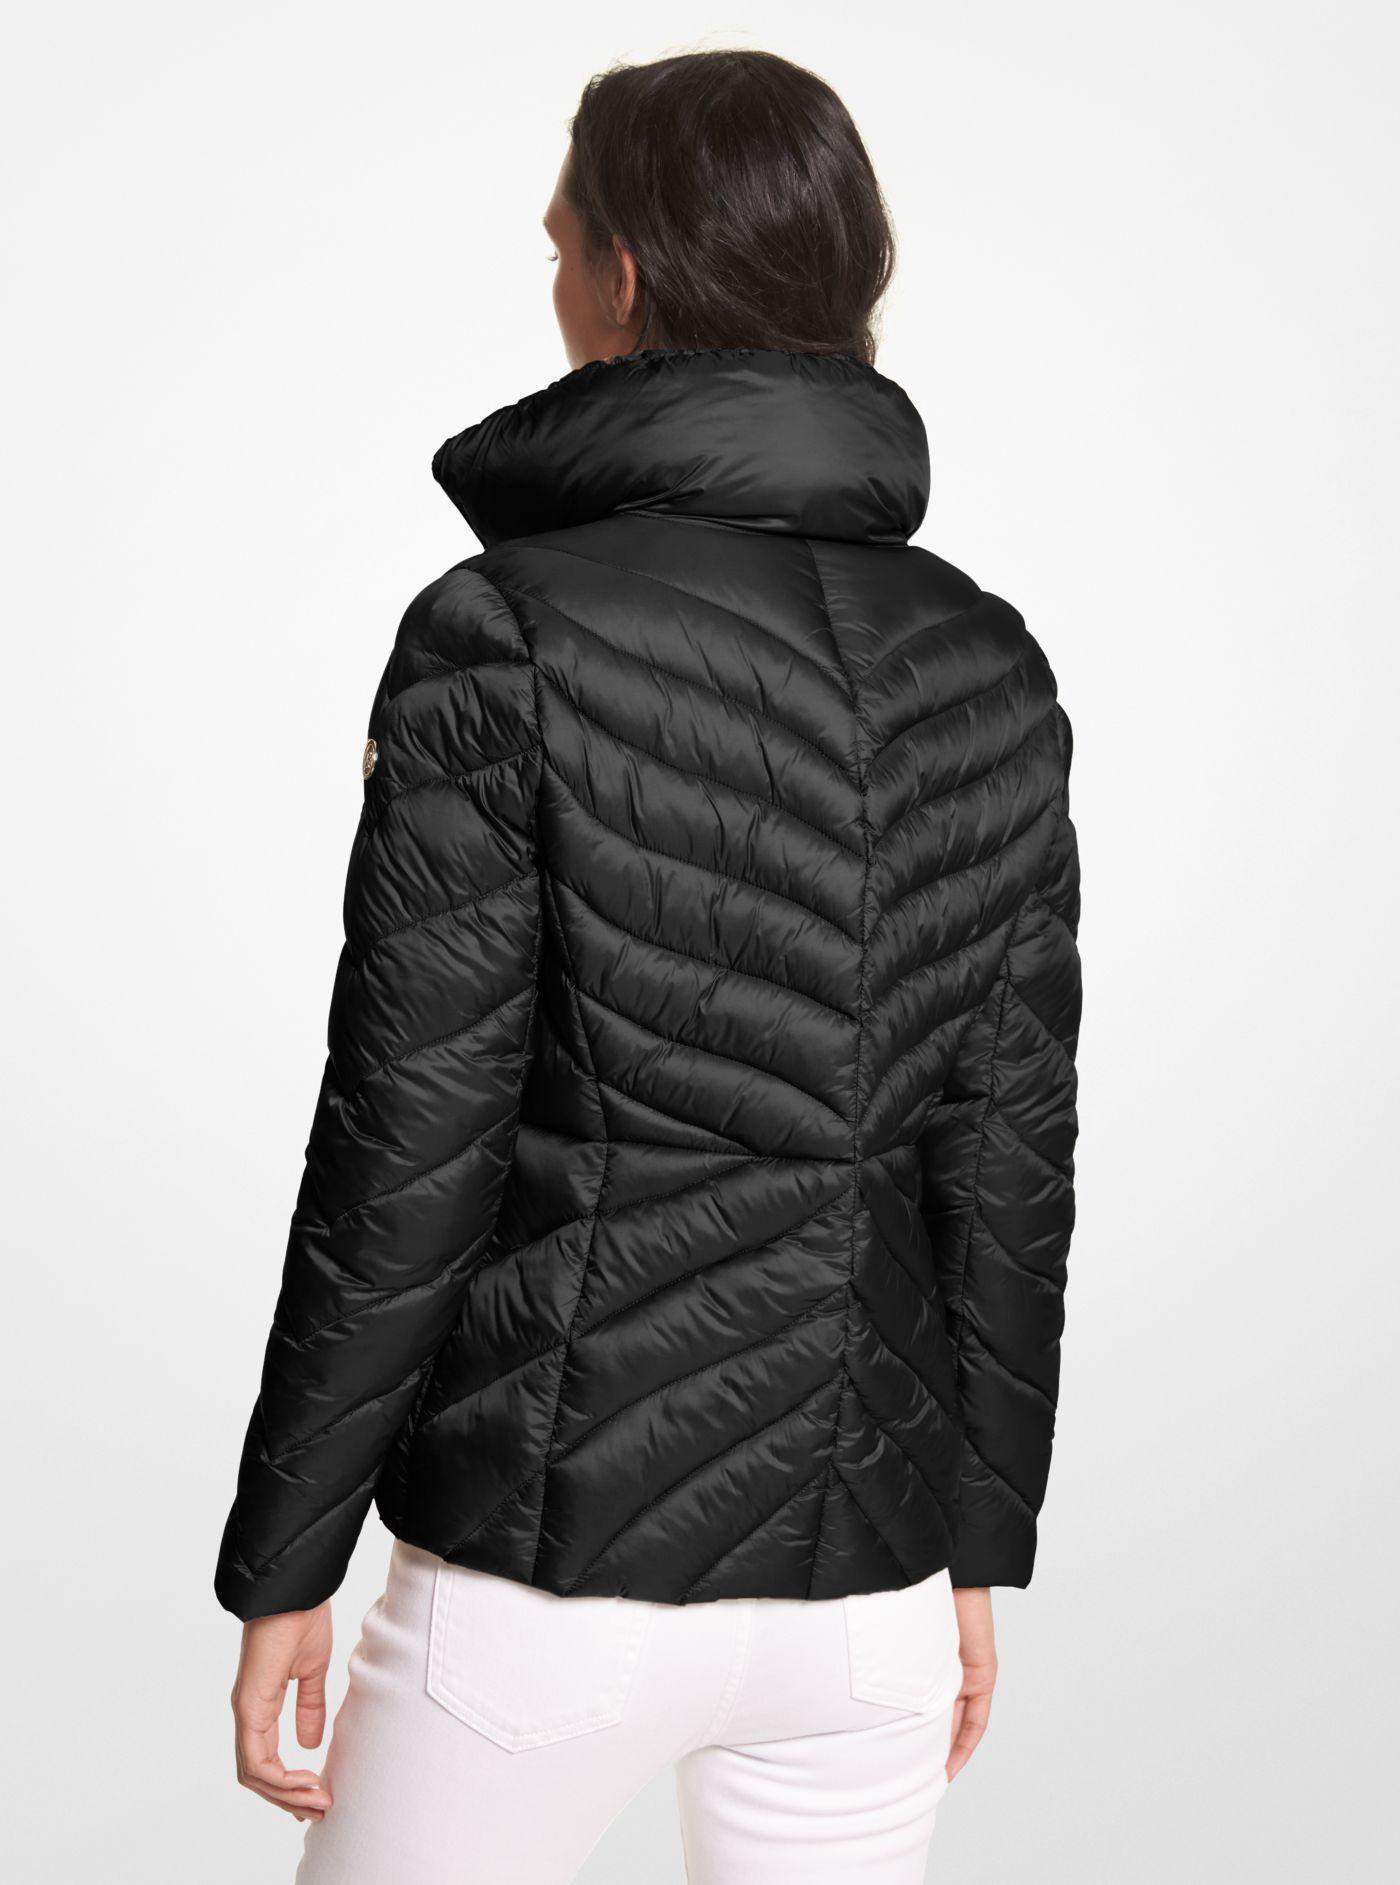 Michael Kors Quilted Nylon Packable Puffer Jacket in Black | Lyst